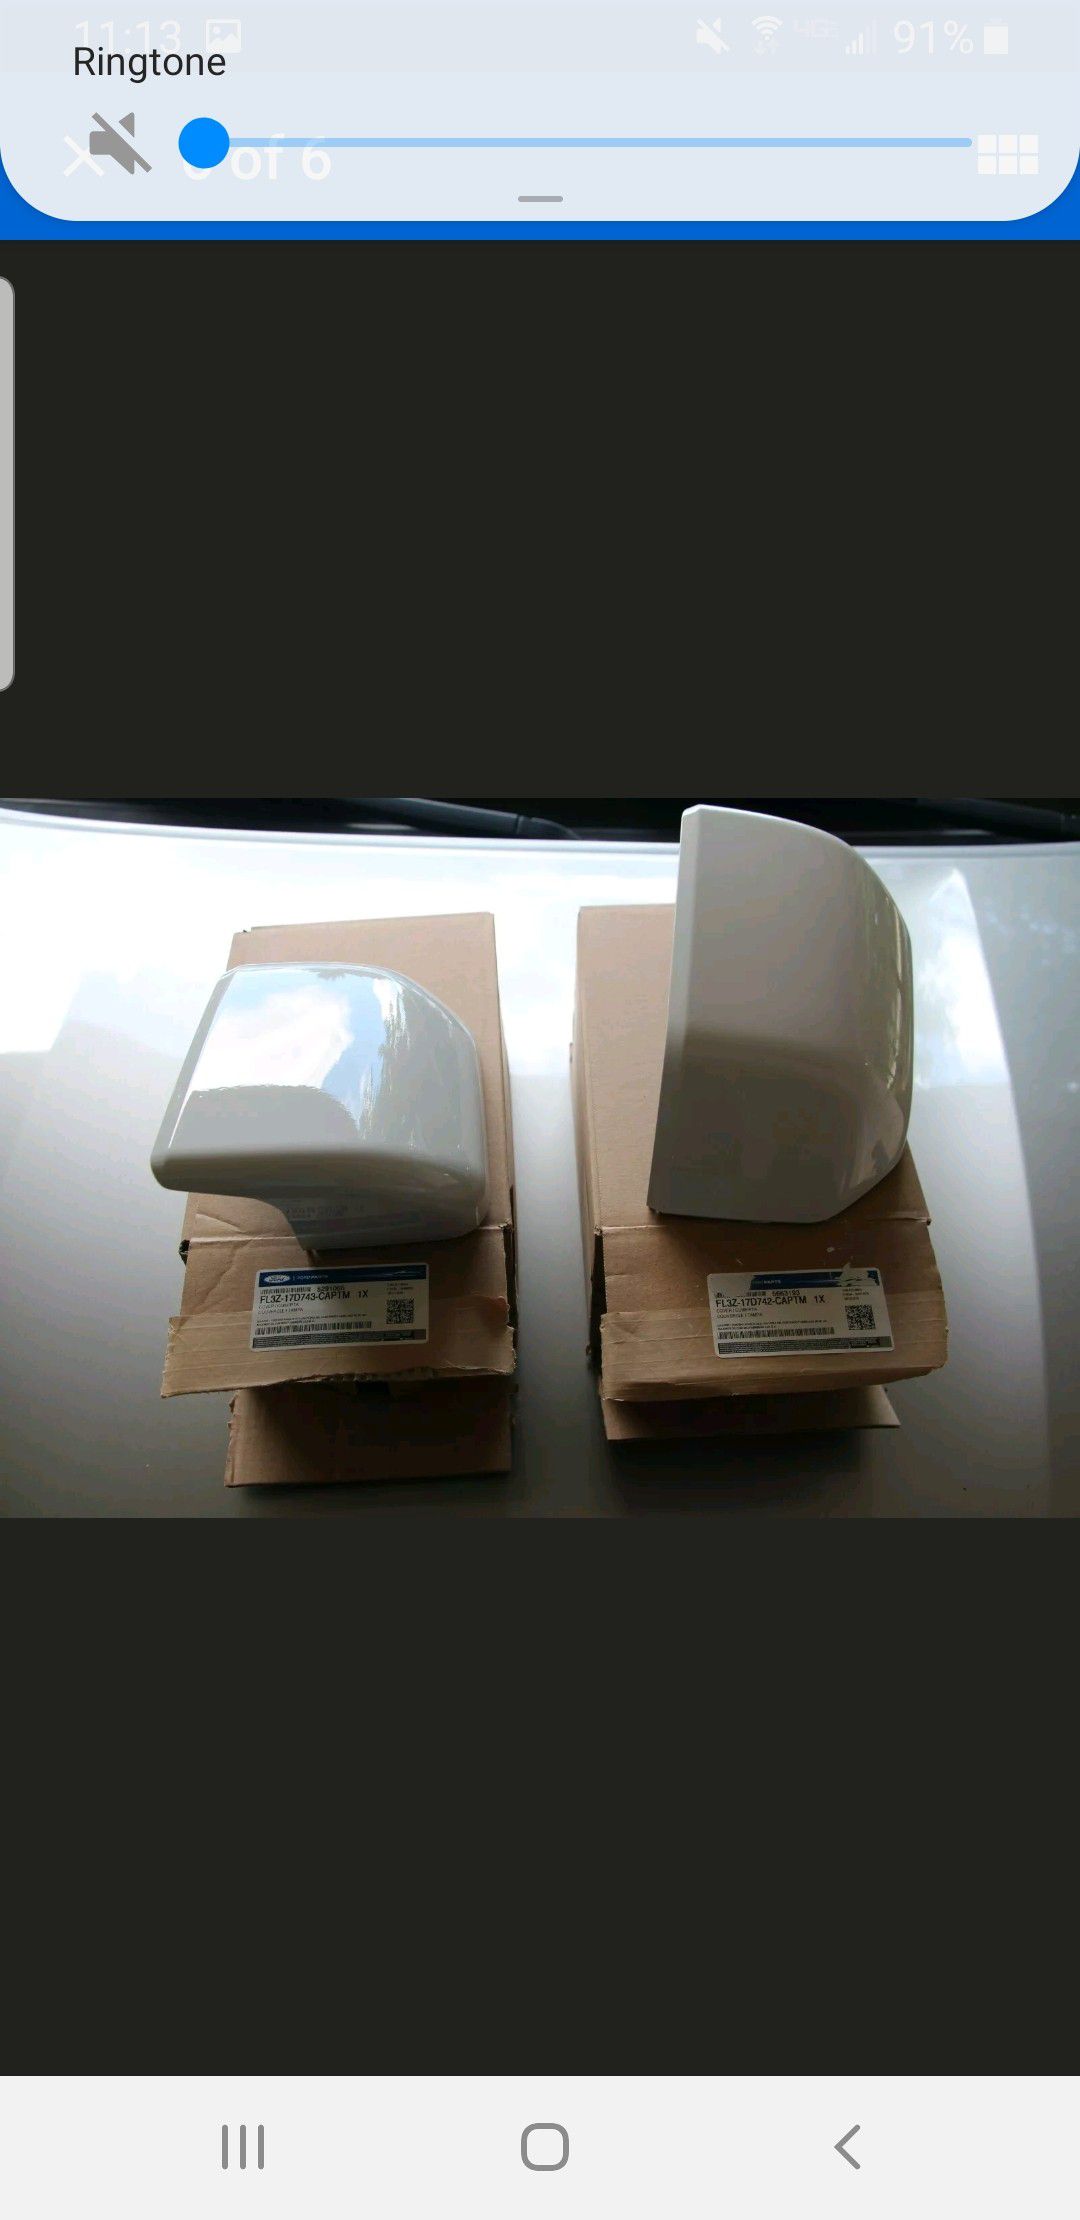 Oxford White YZ 2015 - 2019 Ford F-150 OEM Mirrors Covers Caps Left and Right